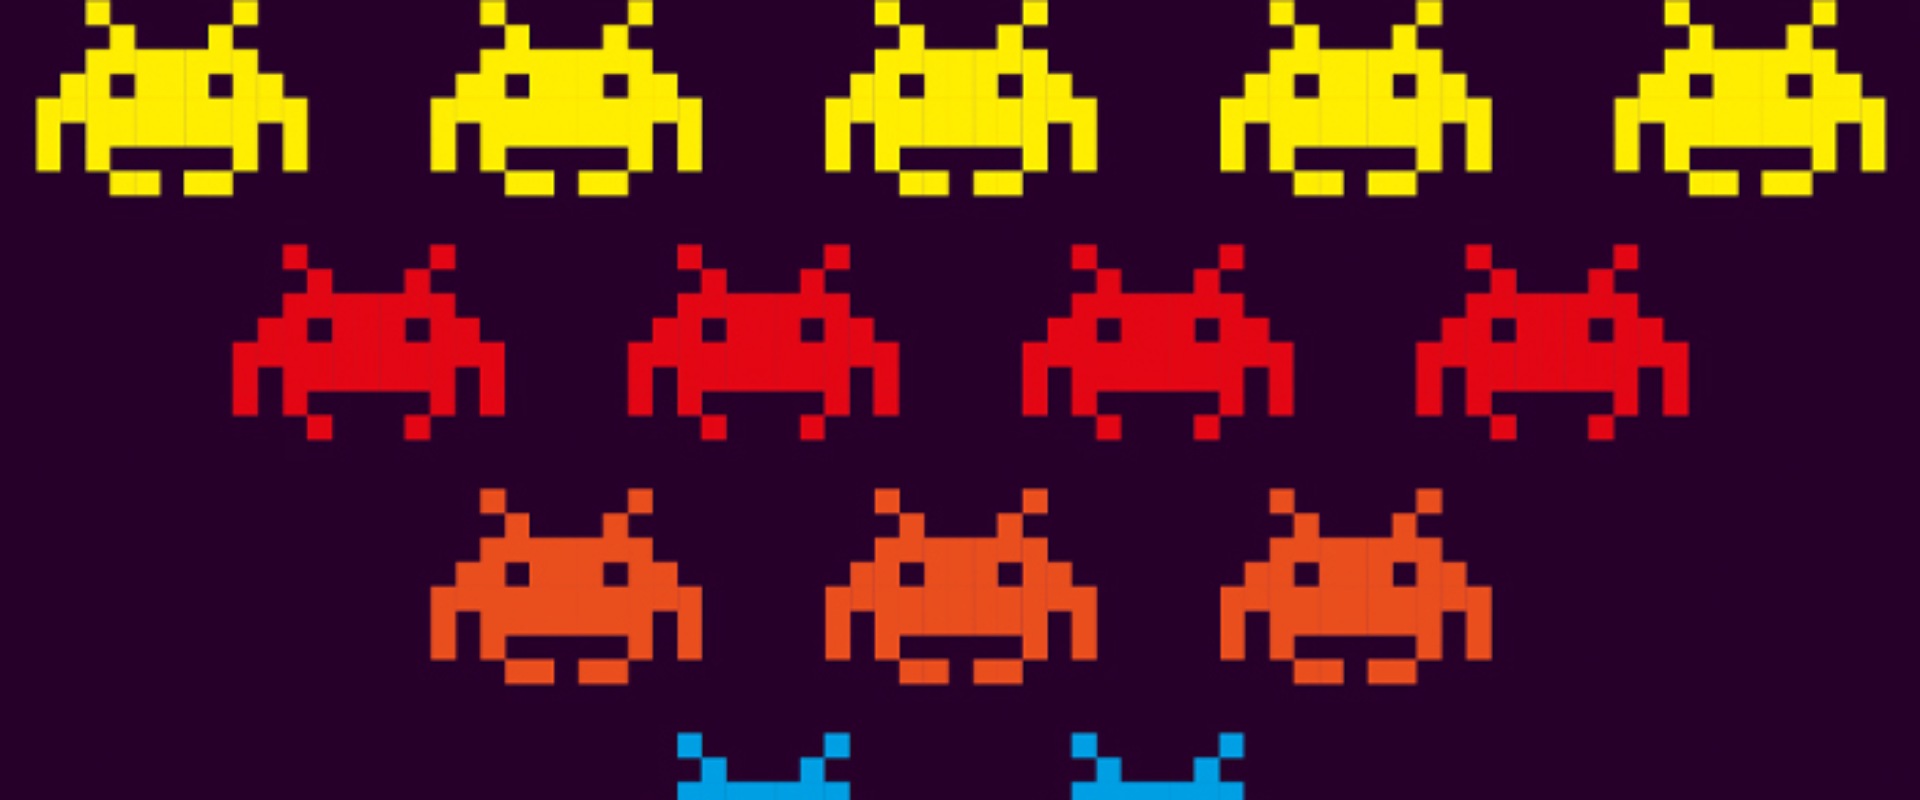 80s gaming style alien outlines